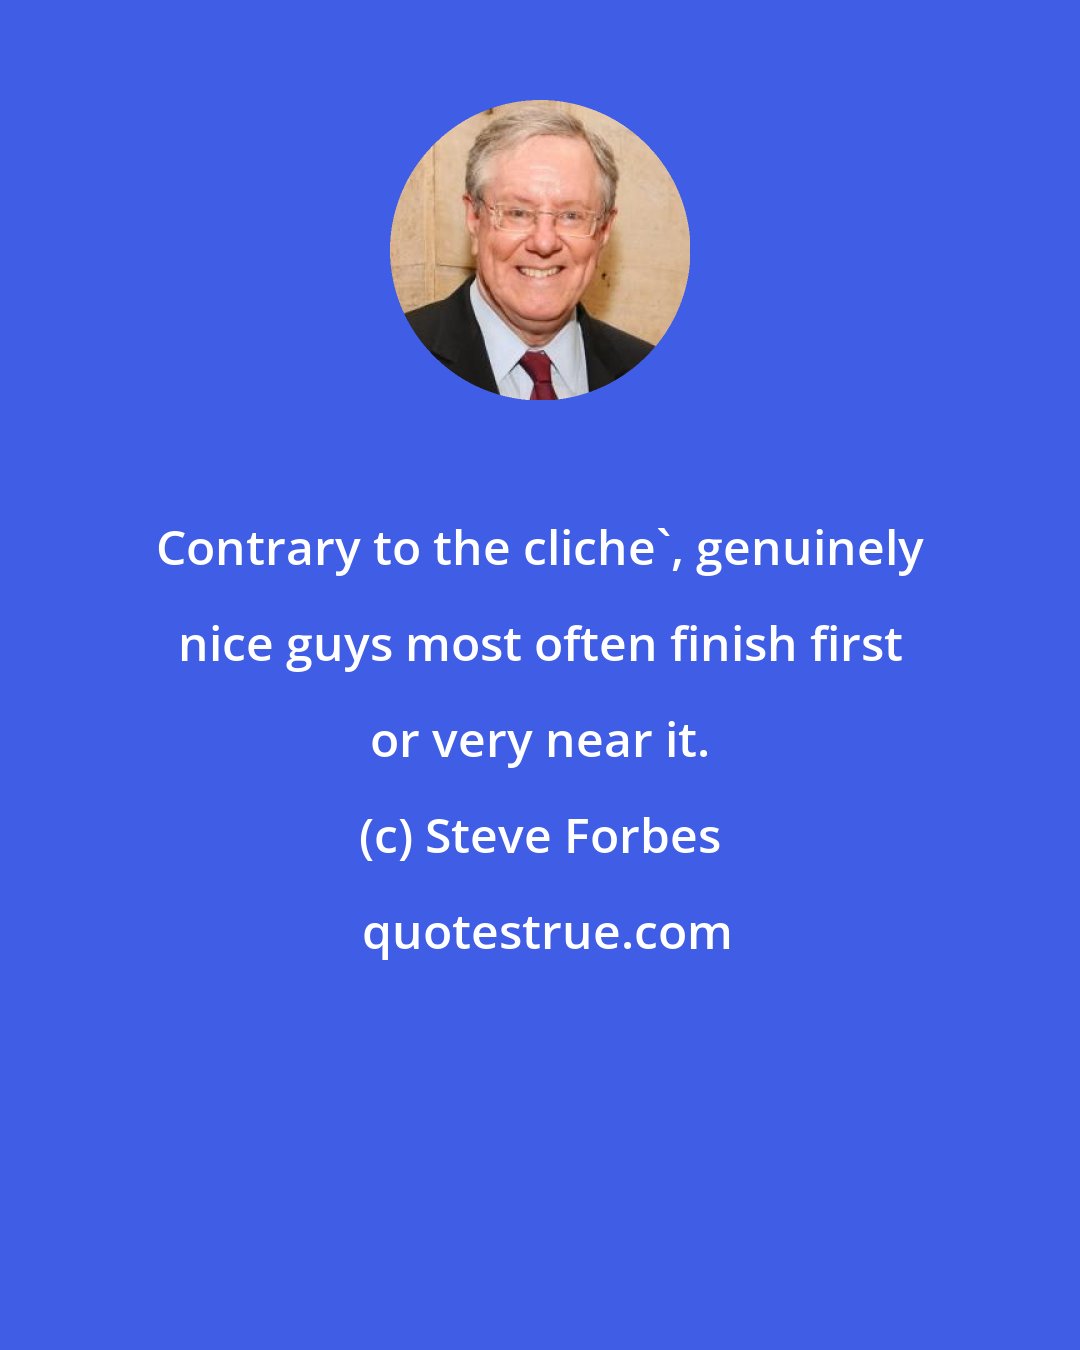 Steve Forbes: Contrary to the cliche', genuinely nice guys most often finish first or very near it.